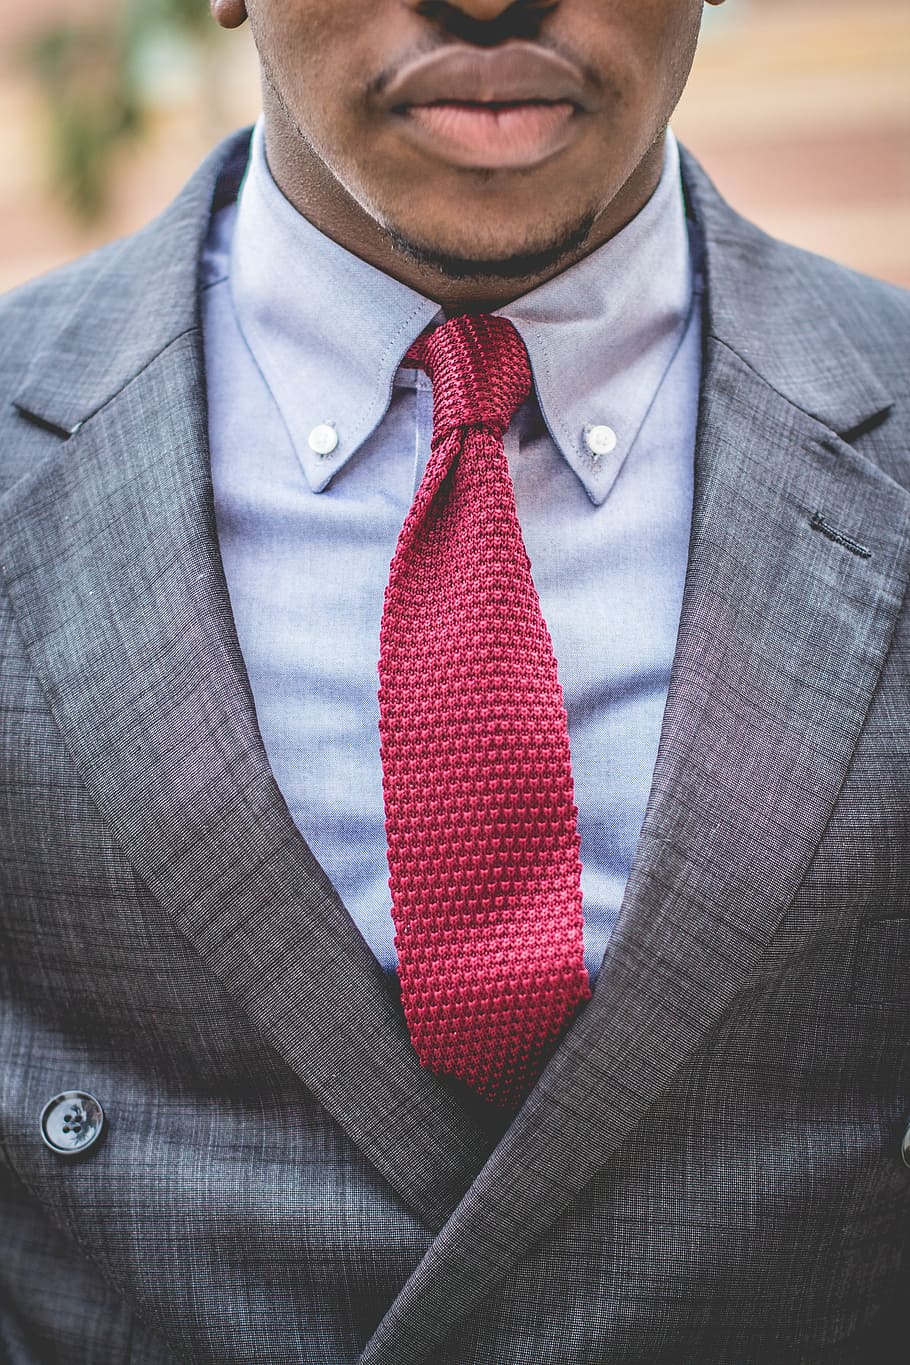 Free download | man, showing, front, red, necktie, gray, suit, guy ...